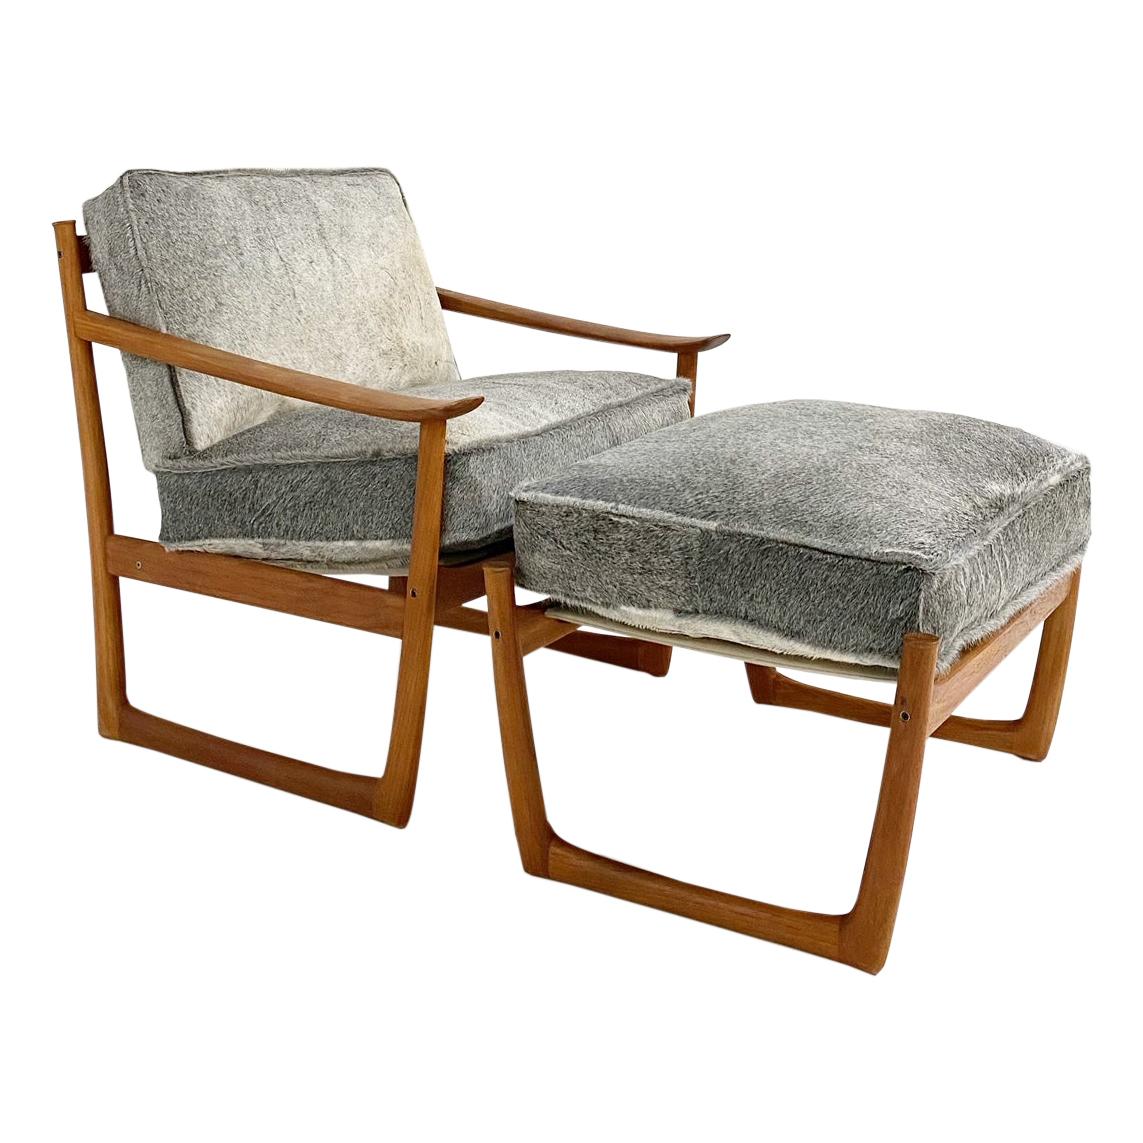 Hvidt and Mølgaard-Nielsen FD-130 Teak Chair and Ottoman in Cowhide For Sale